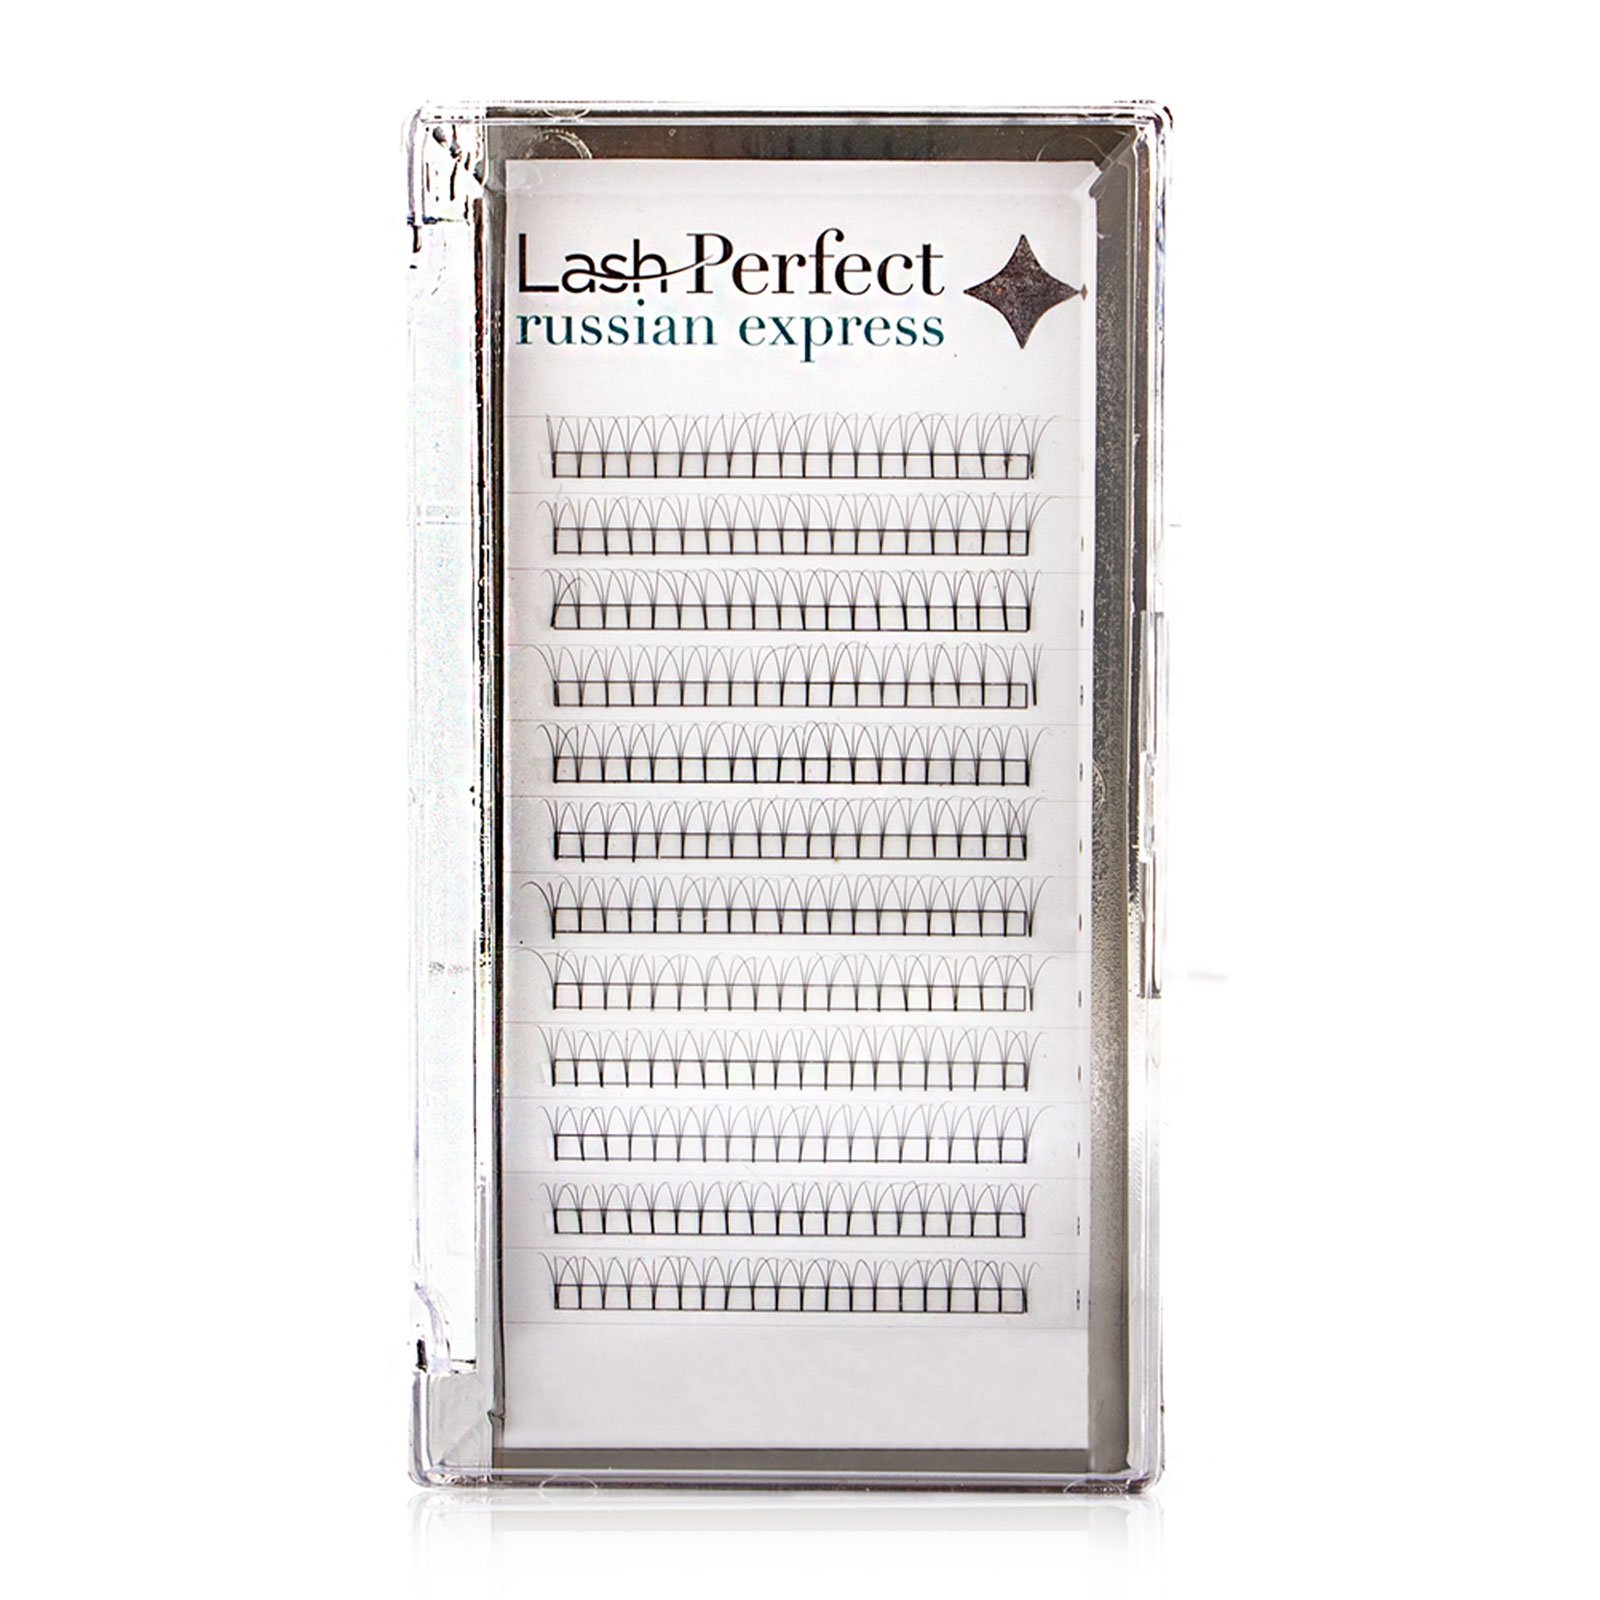 Lash Perfect Russian Express Lashes C Curl 3D 0.07 13Mm (12 Lines)